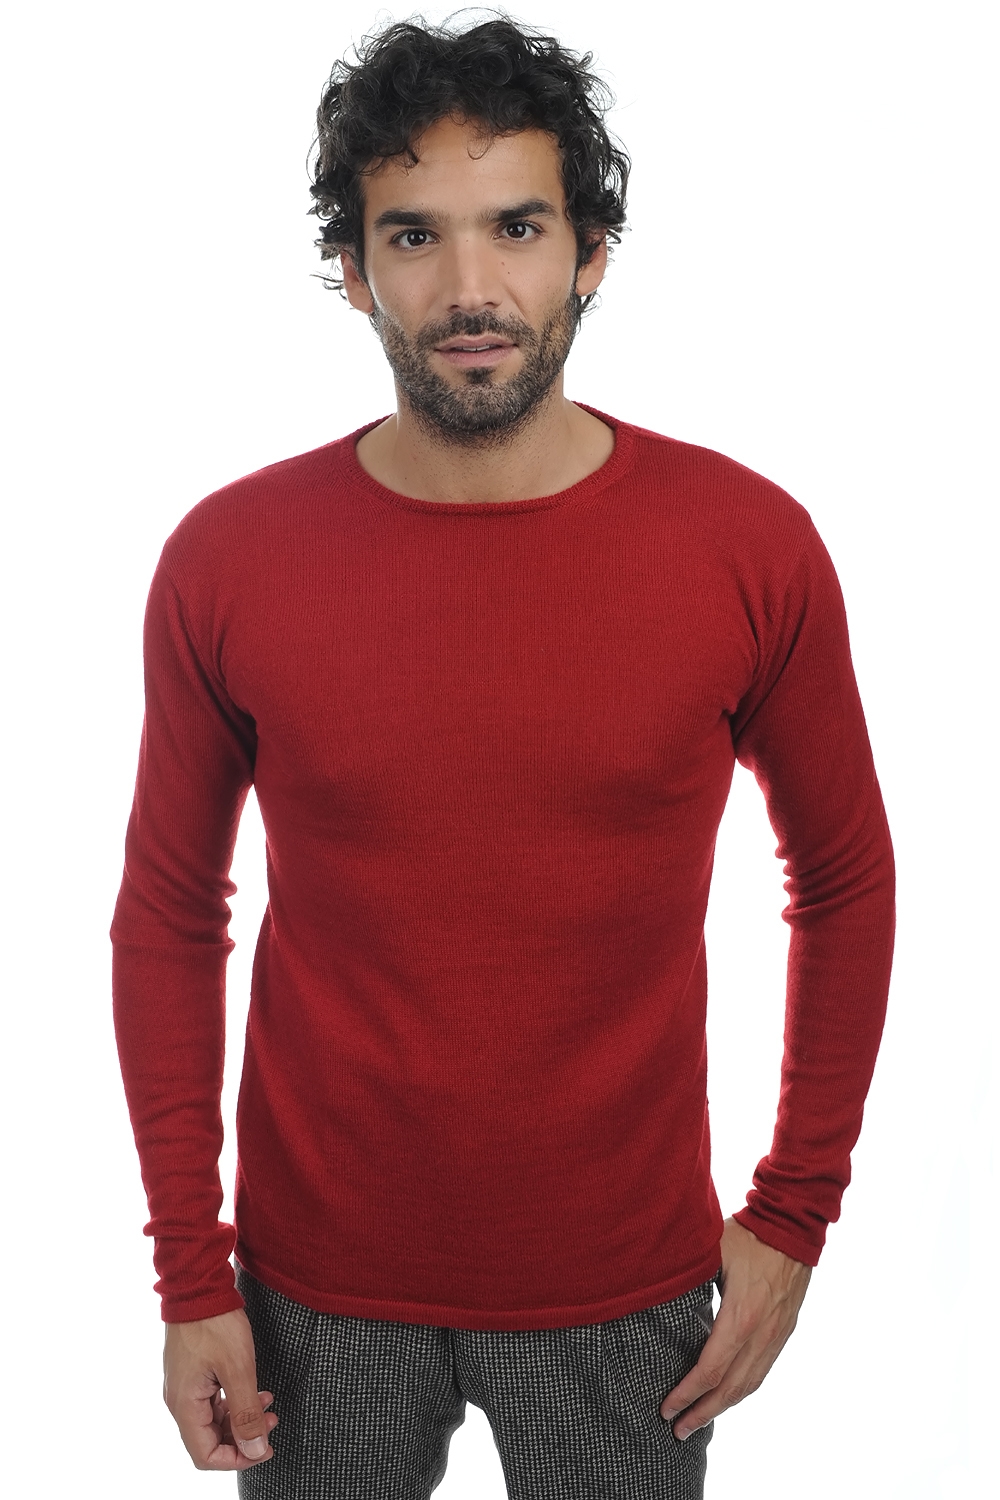 Baby Alpaga pull homme christian rouge l